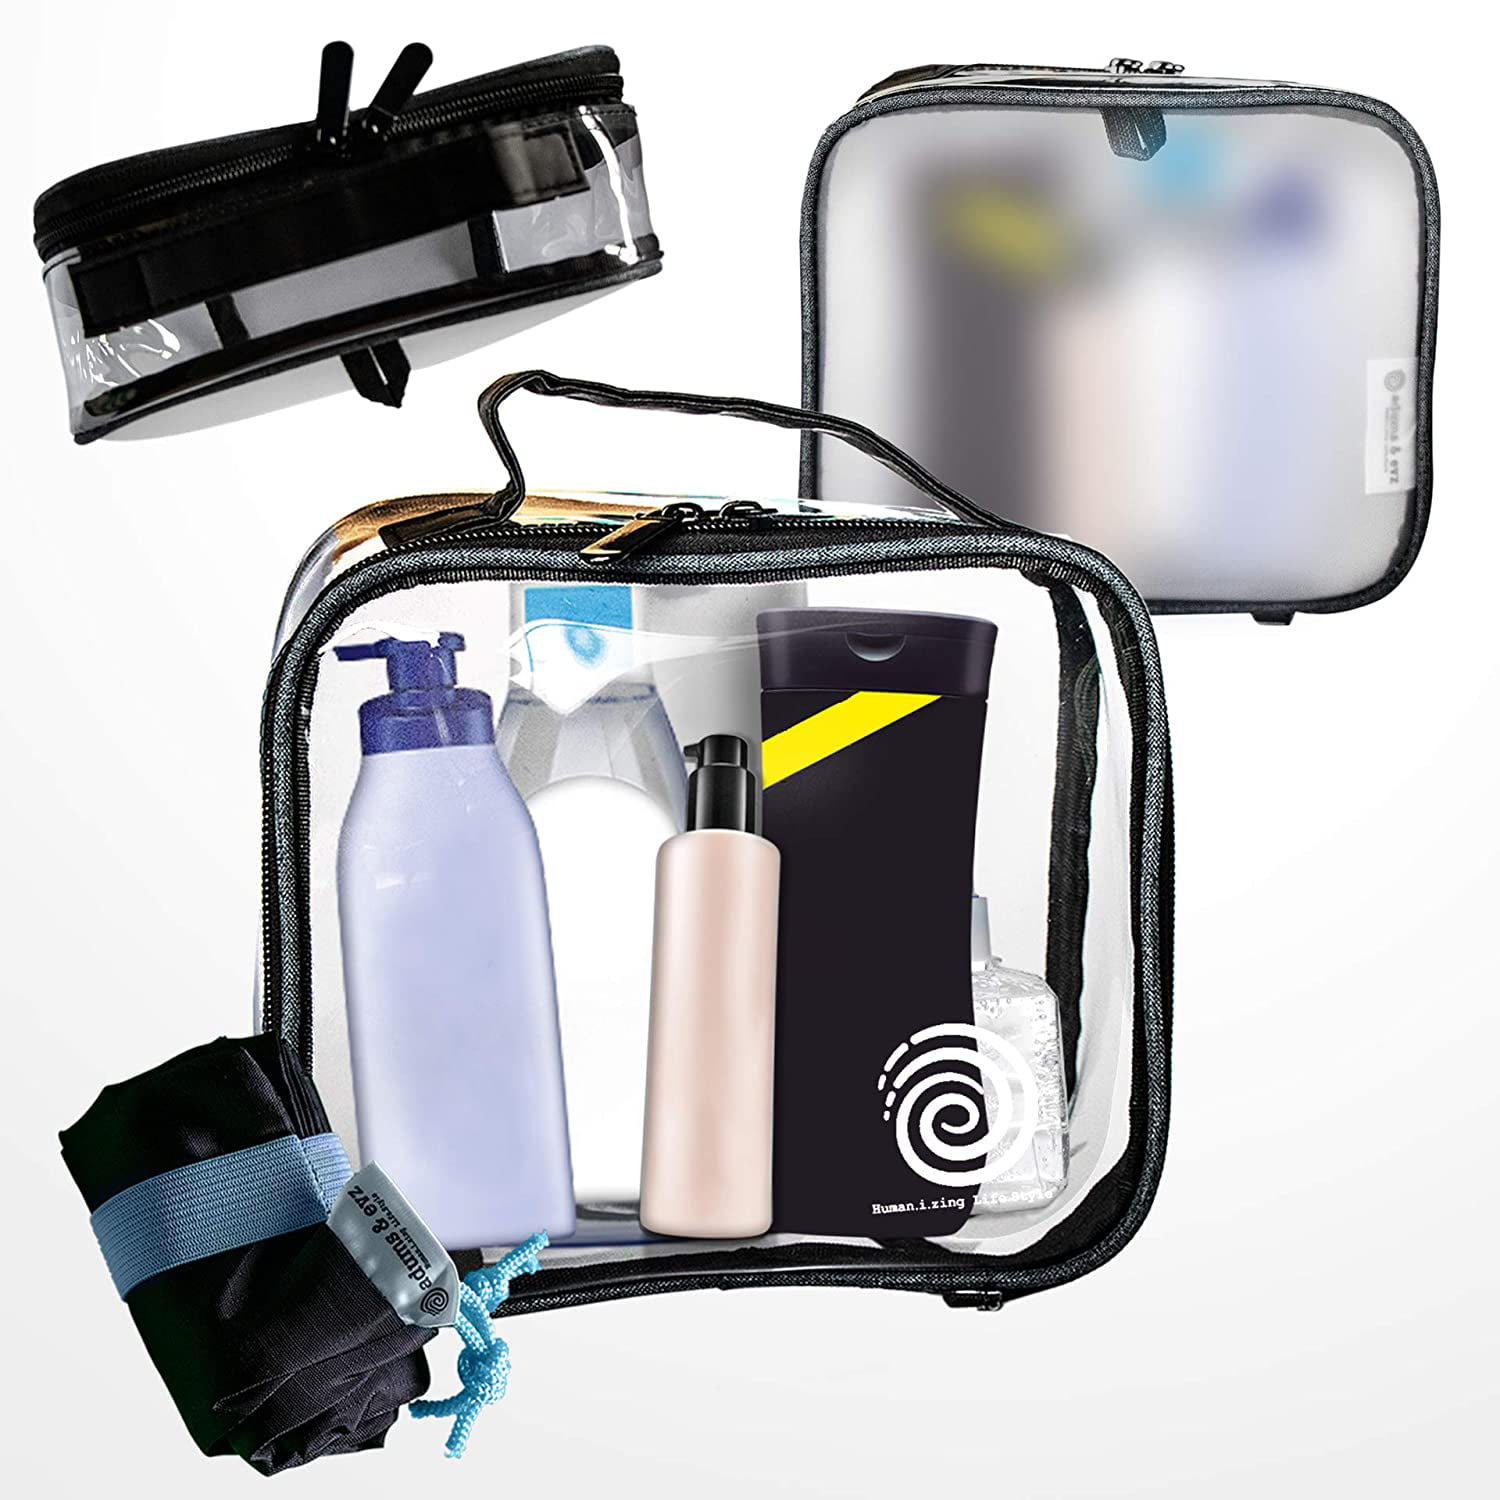 Adums & Evz - Clear Toiletry Travel Bag TSA Approved Size for Travel with Handle & Hook for Men ...